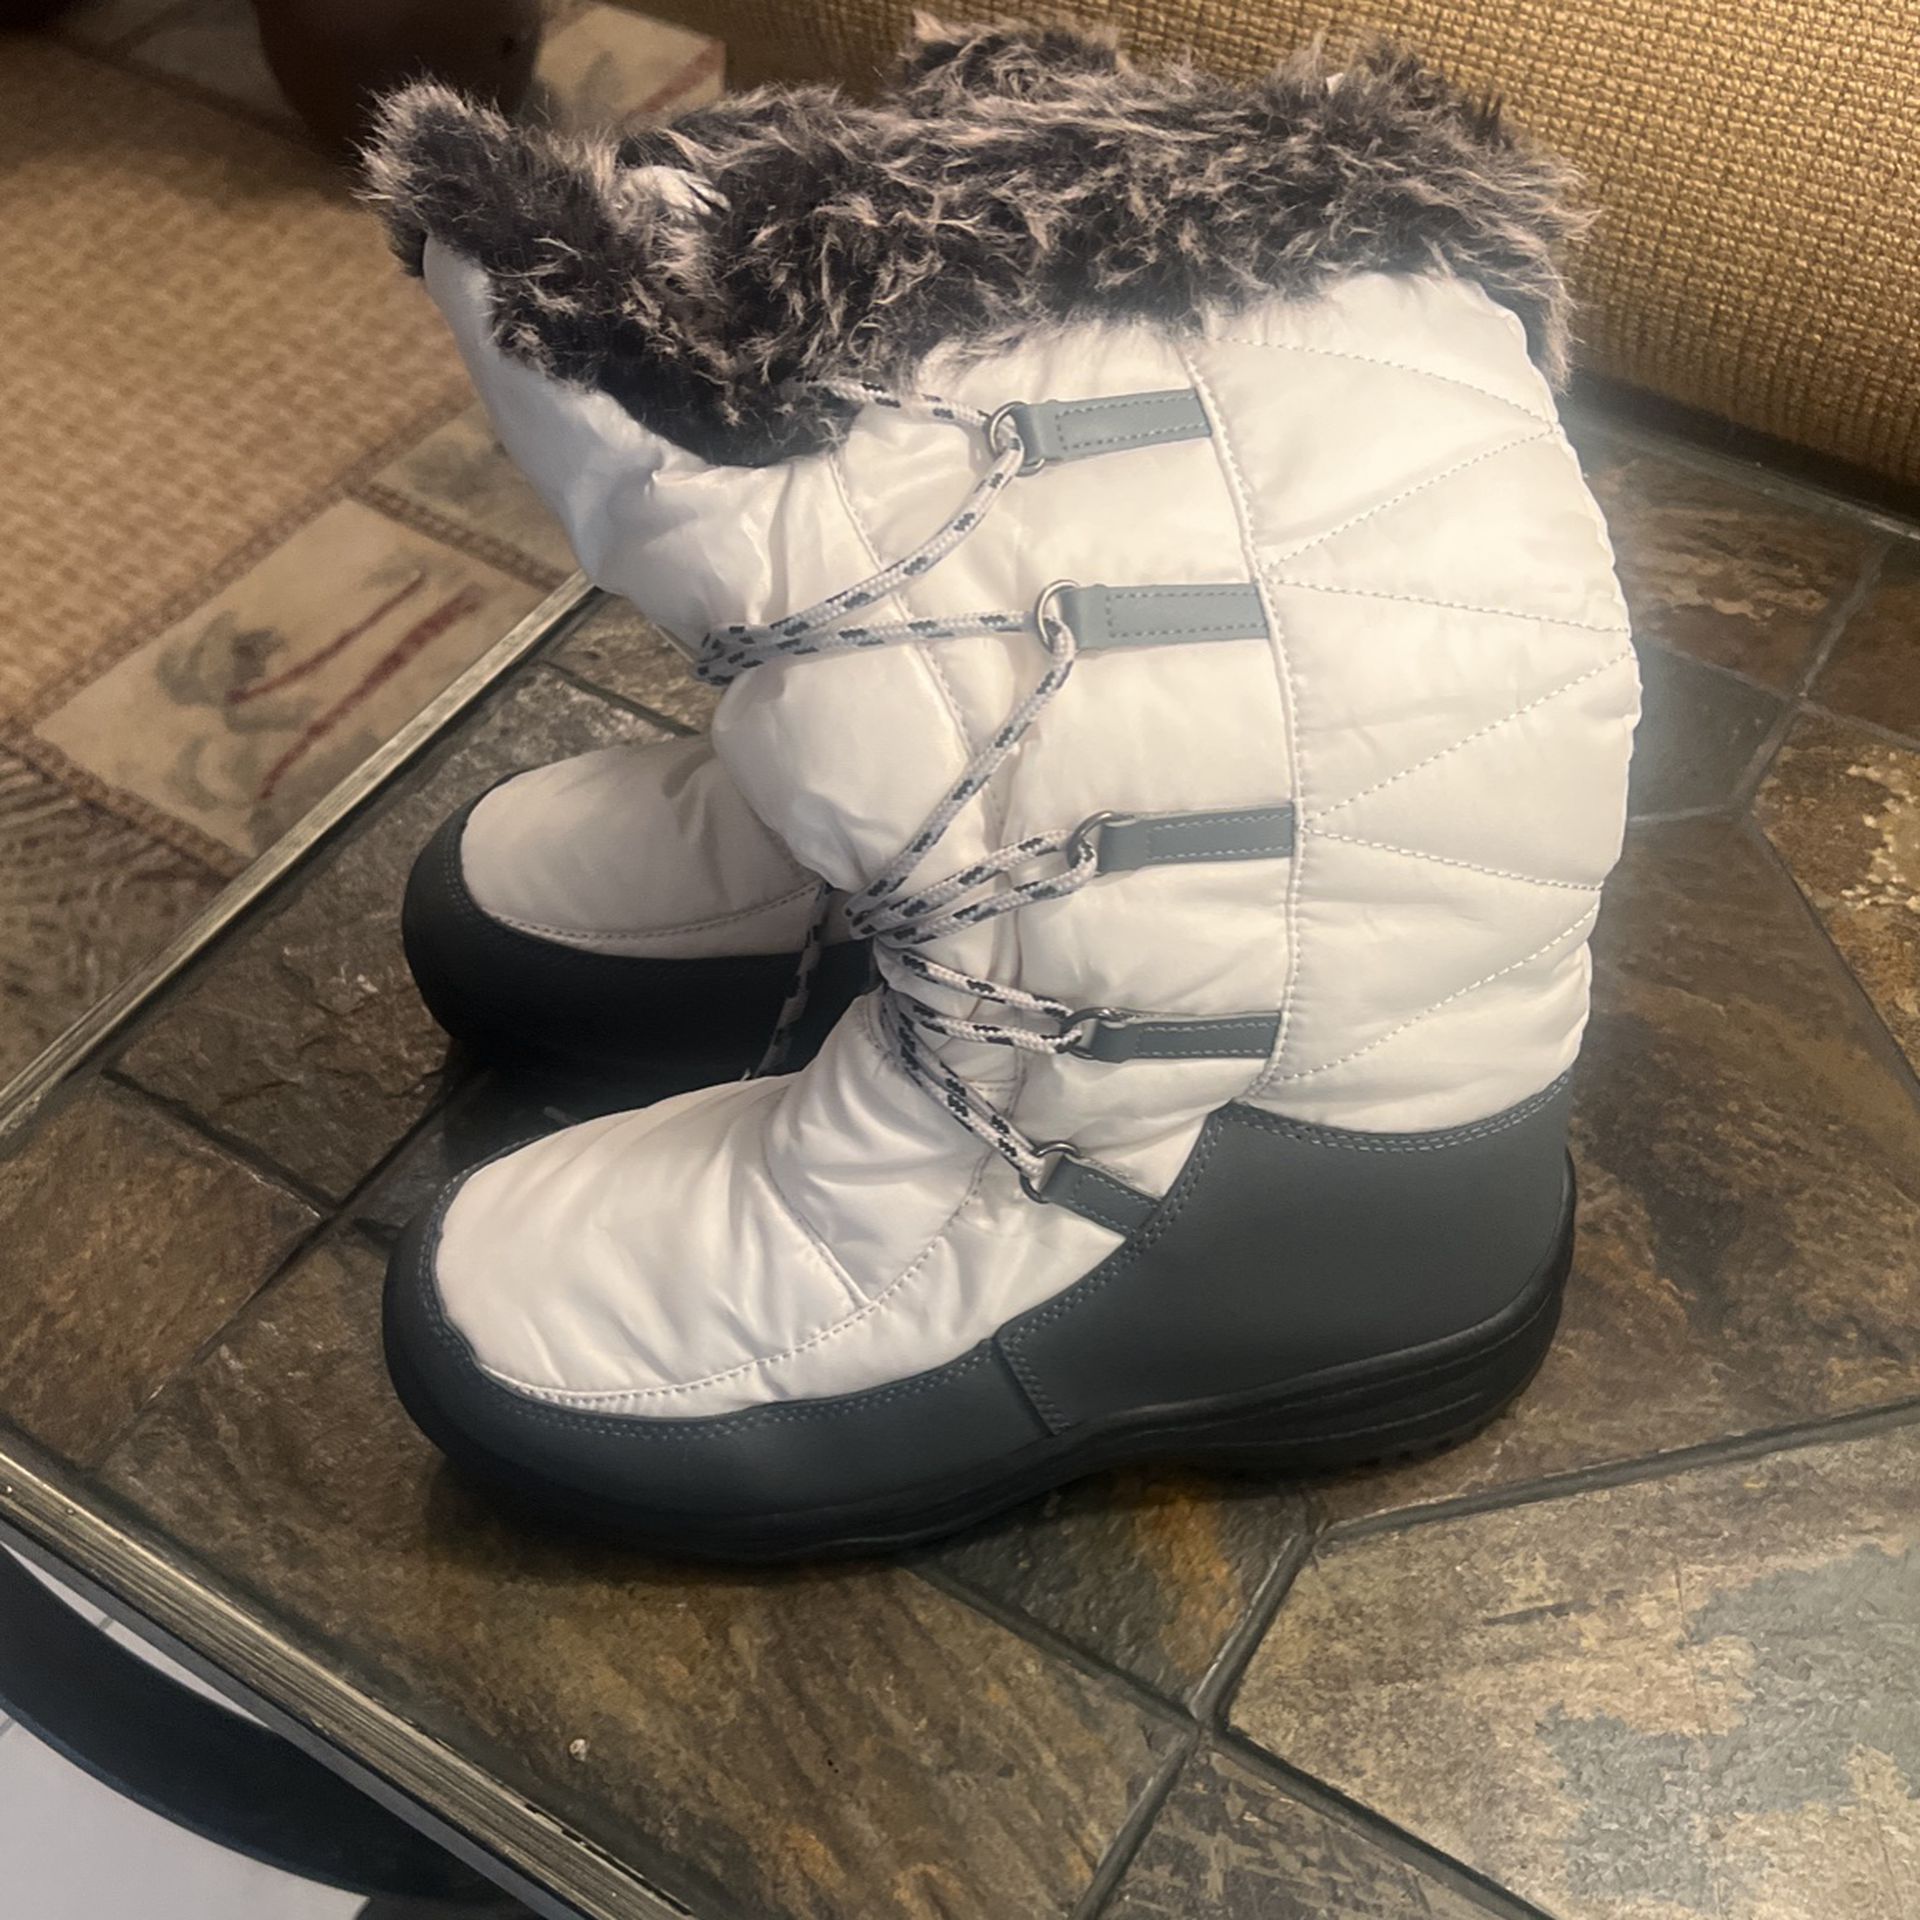 Dream Pairs Women’s Warm Faux Fur Lined Mid-Calf